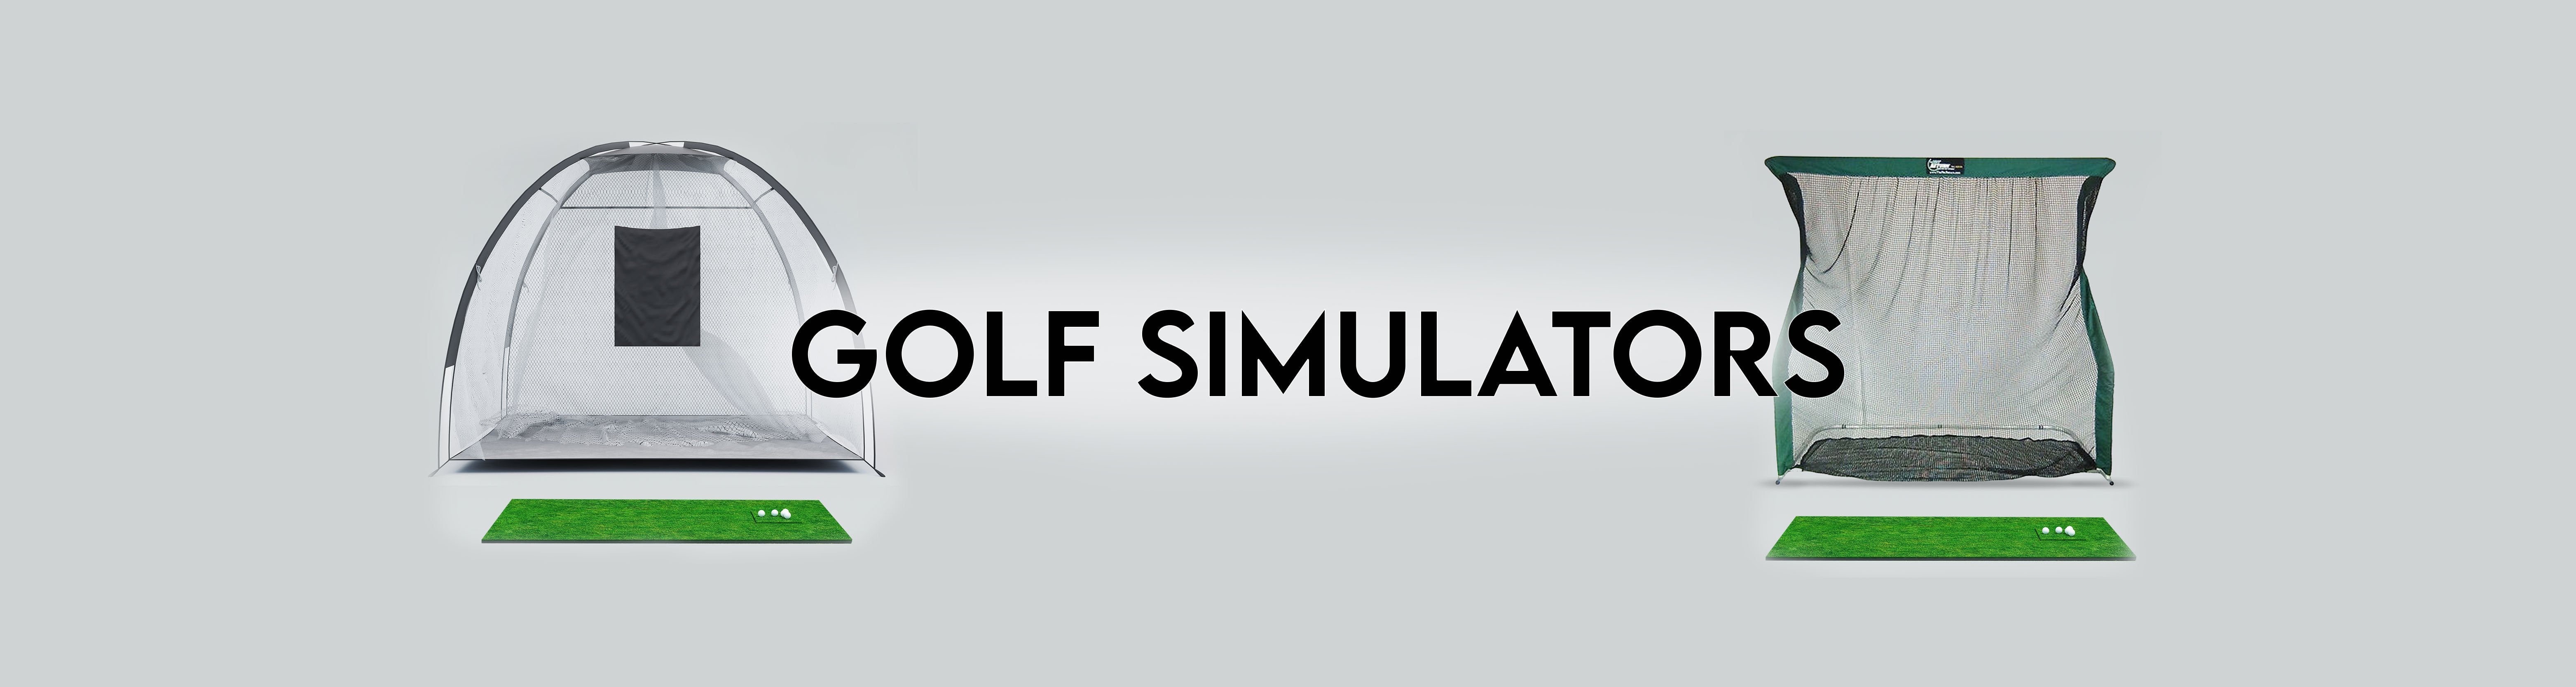 Golf Simulators - Recreation Outfitters